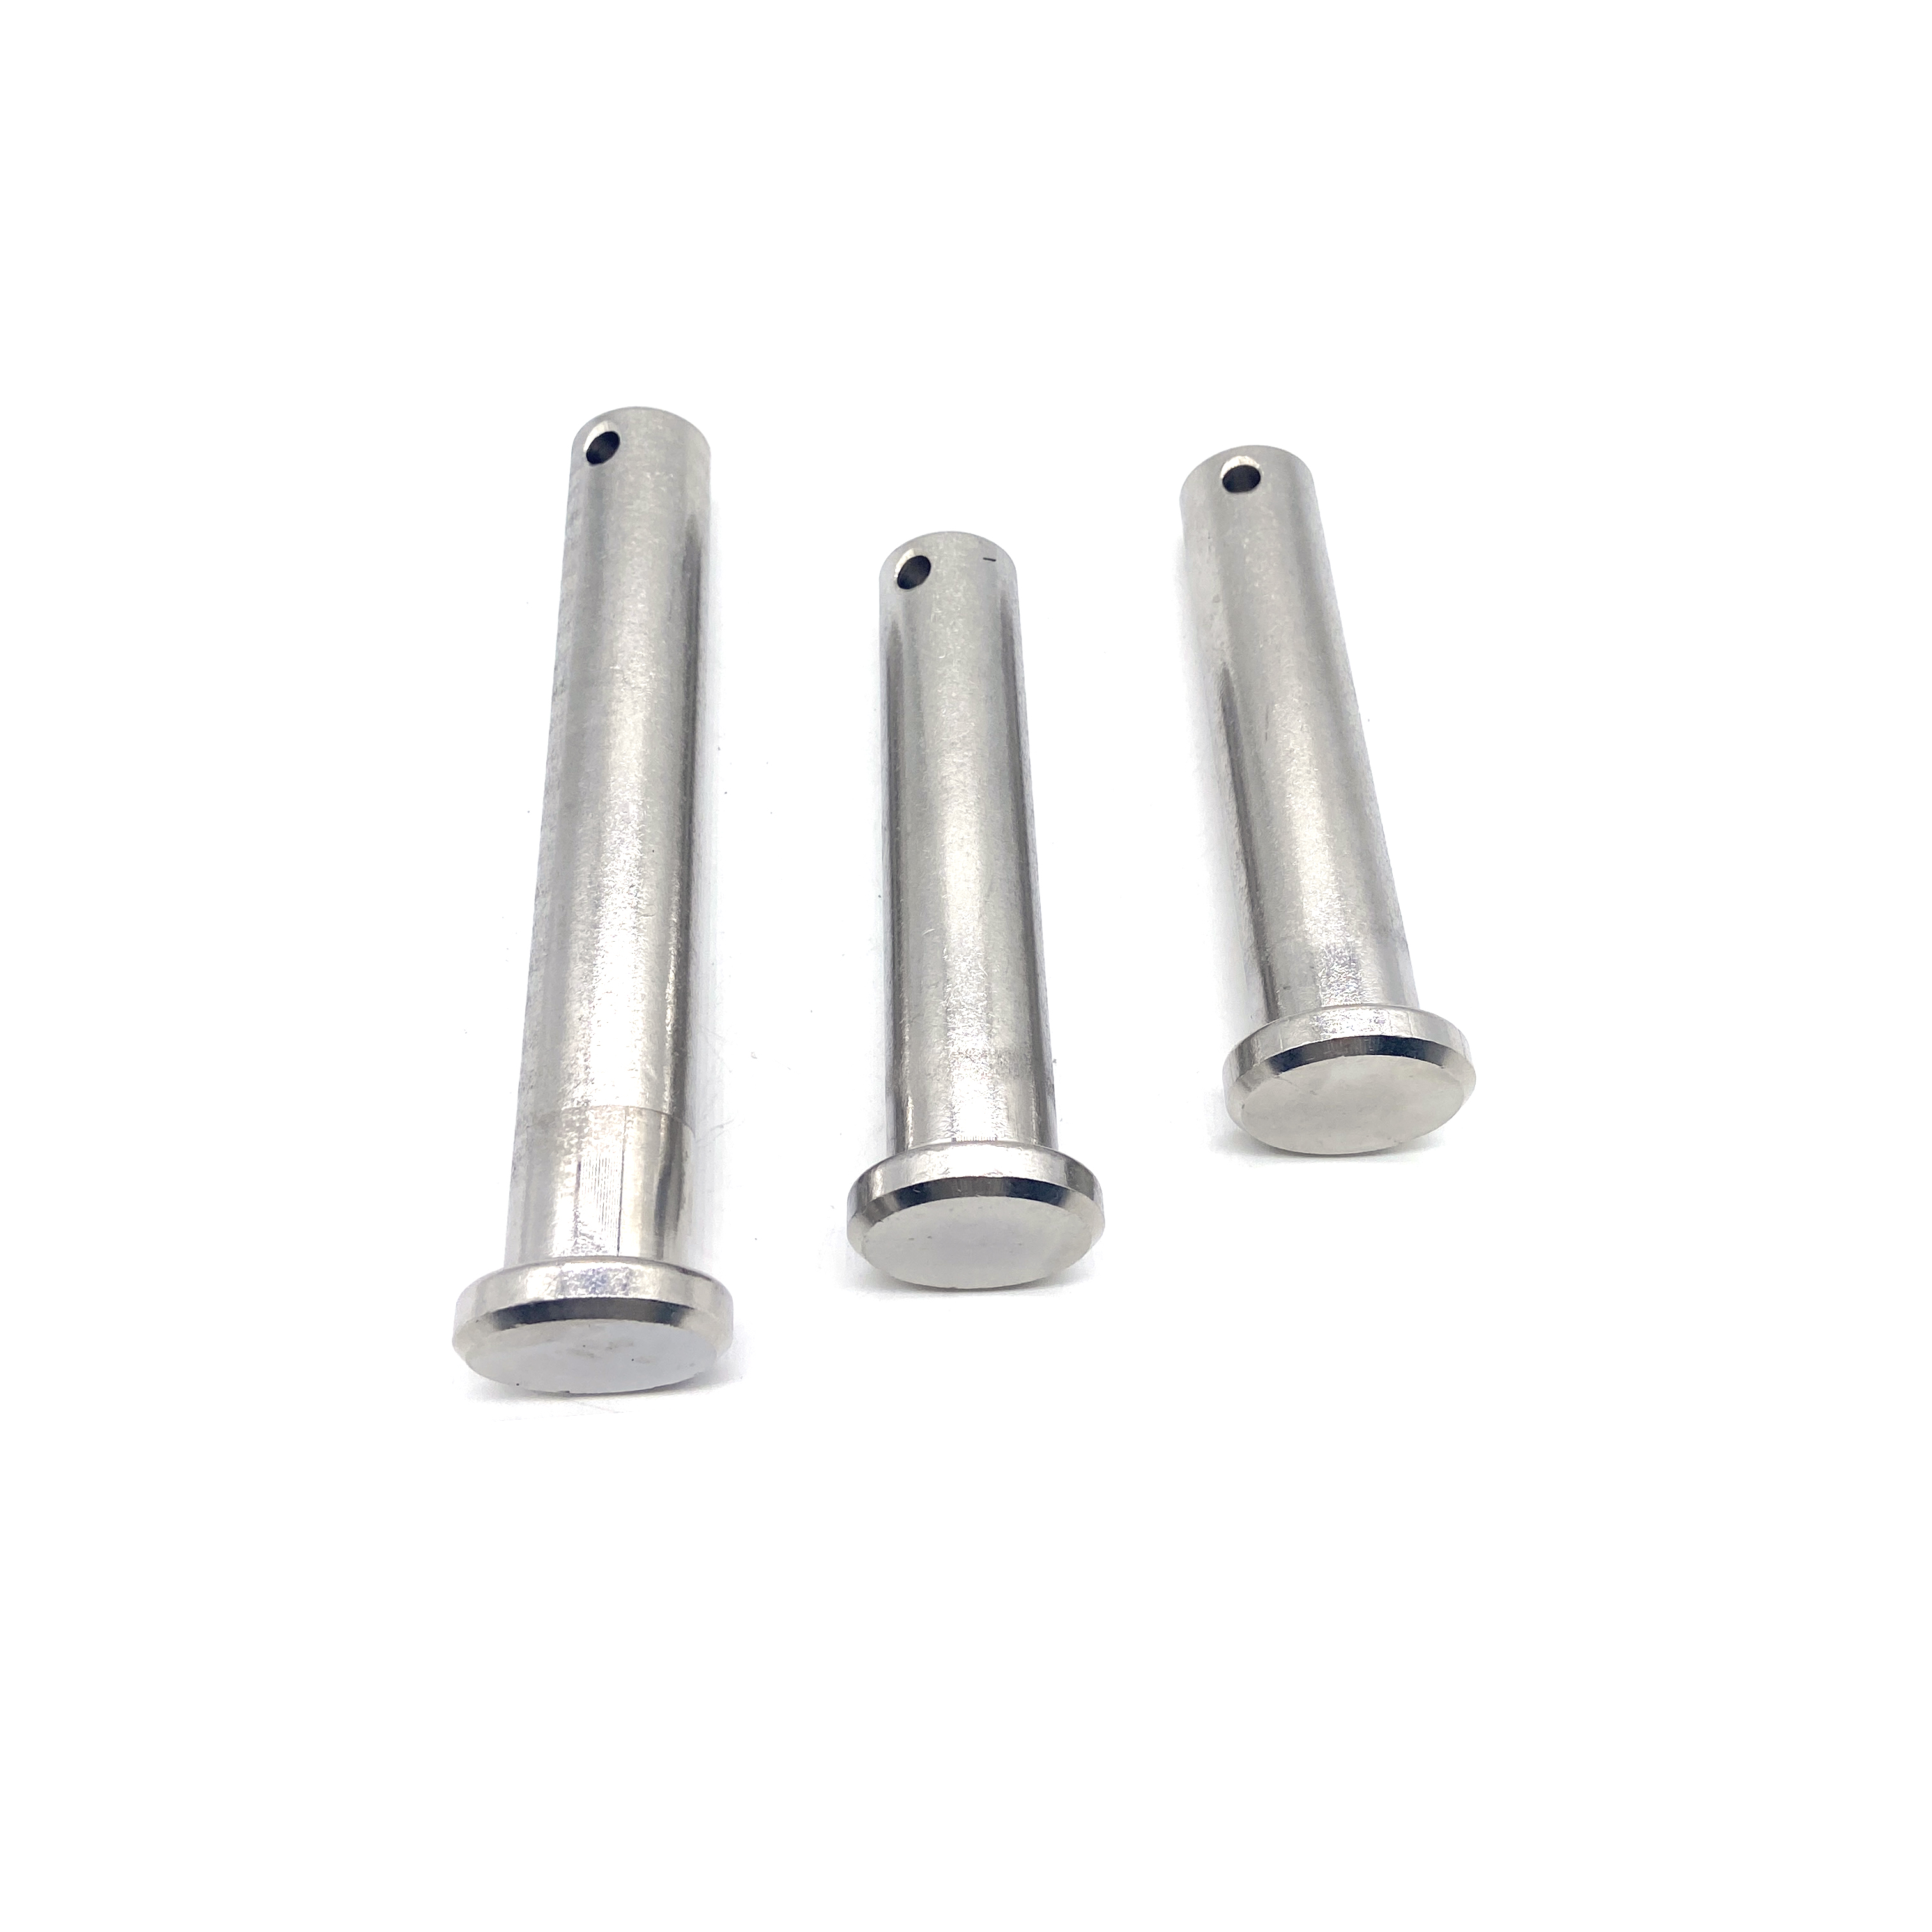 Hot Sale Stainless Steel Grooved Lock Pin M3 M4 M5 Flat Head Clevis Pin With Groove Buy 